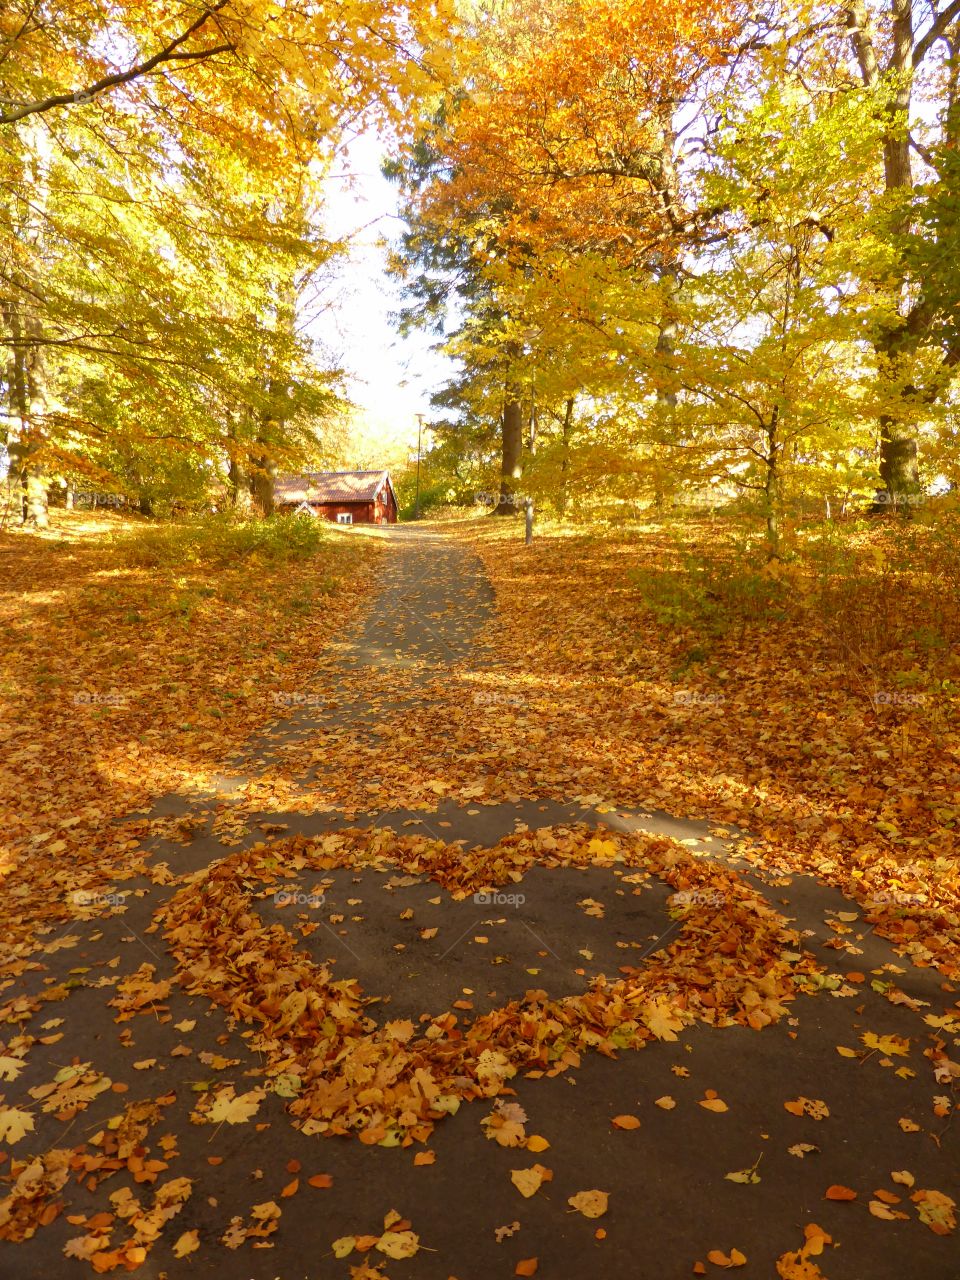 Autumn leaves on the ground shaped as a heart